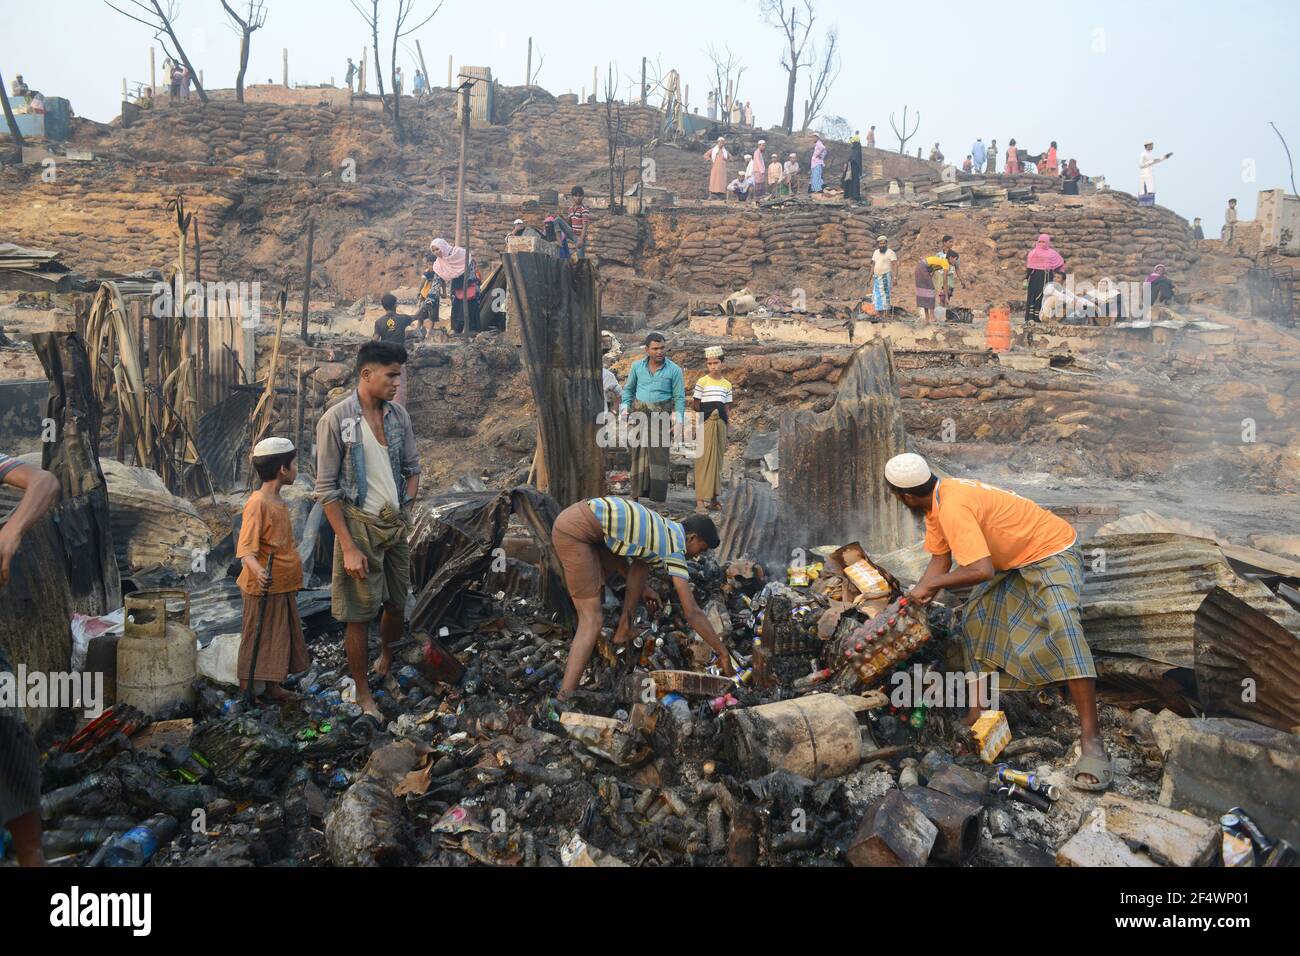 Cox's Bazar, Bangladesh. 23rd Mar, 2021. Massive fire destroys around 10000 homes and 15 killed on Monday March 22 in Rohingya refugee camp at Cox'x Bazar, Bangladesh.Credit: Md Zakirul Mazed/Alamy live News Stock Photo